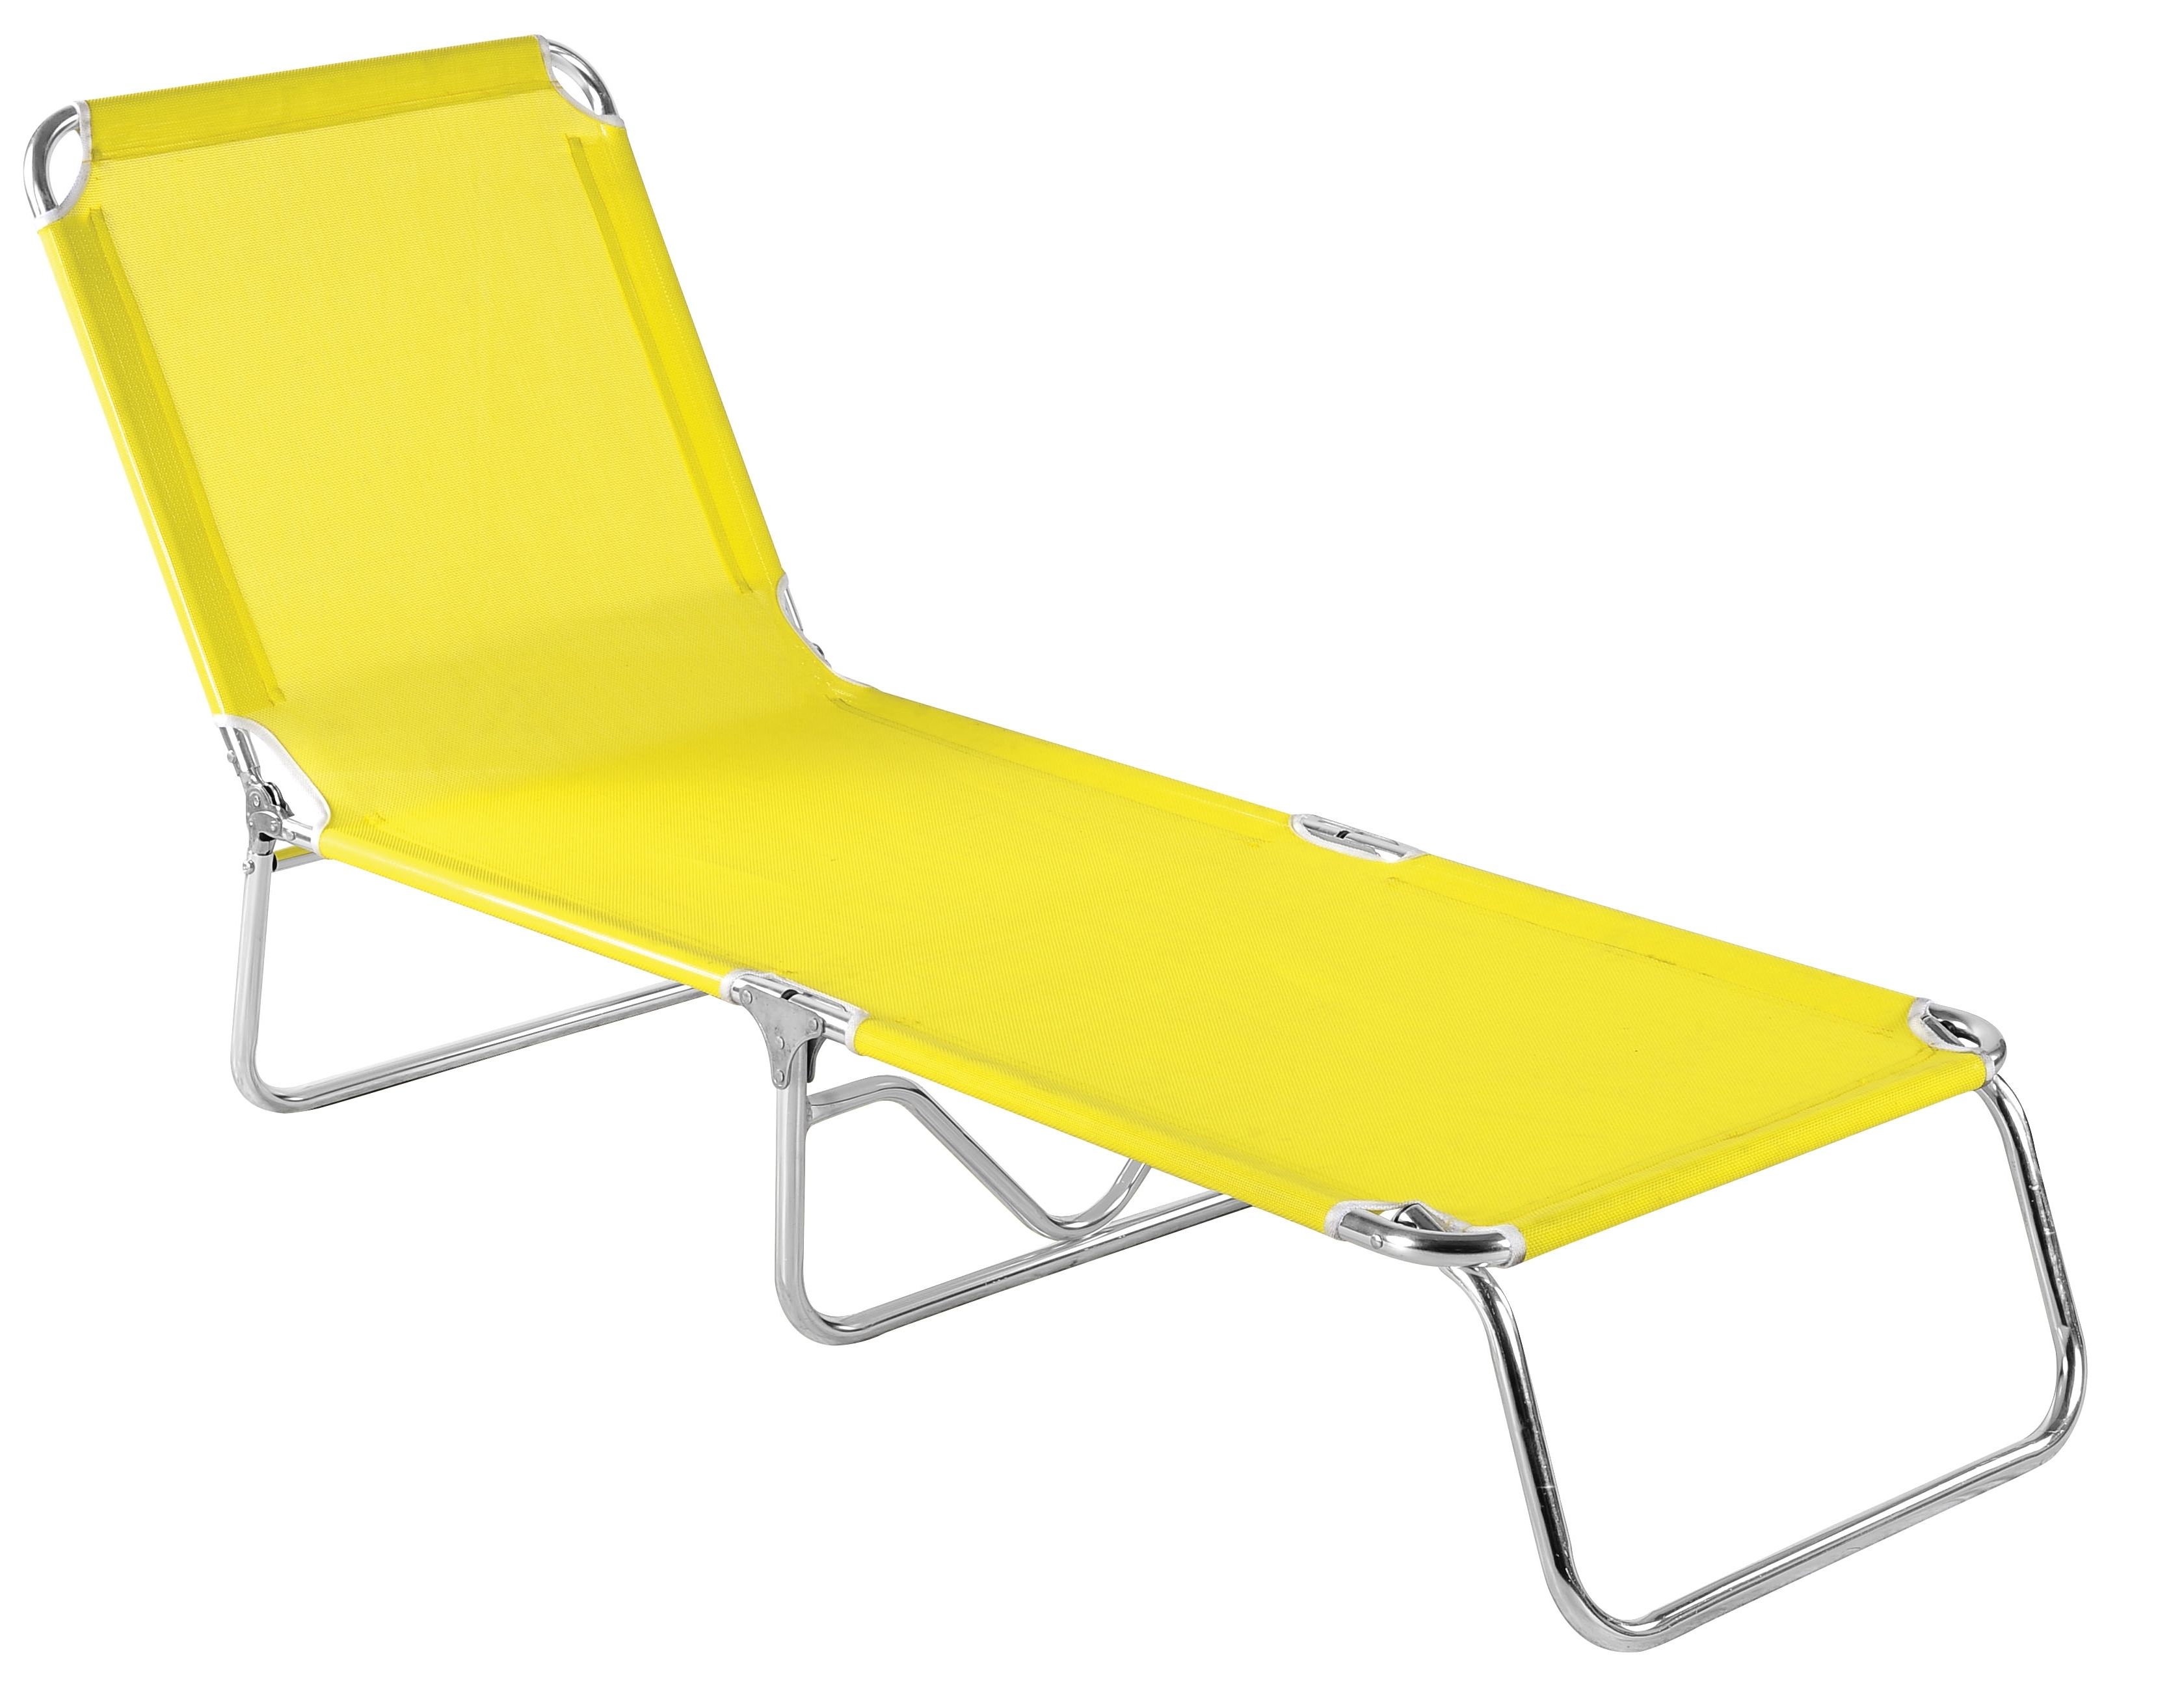 Fashionable Folding Beach Chaise Lounge Chairs • Lounge Chairs Ideas Inside Beach Chaise Lounges (View 6 of 15)